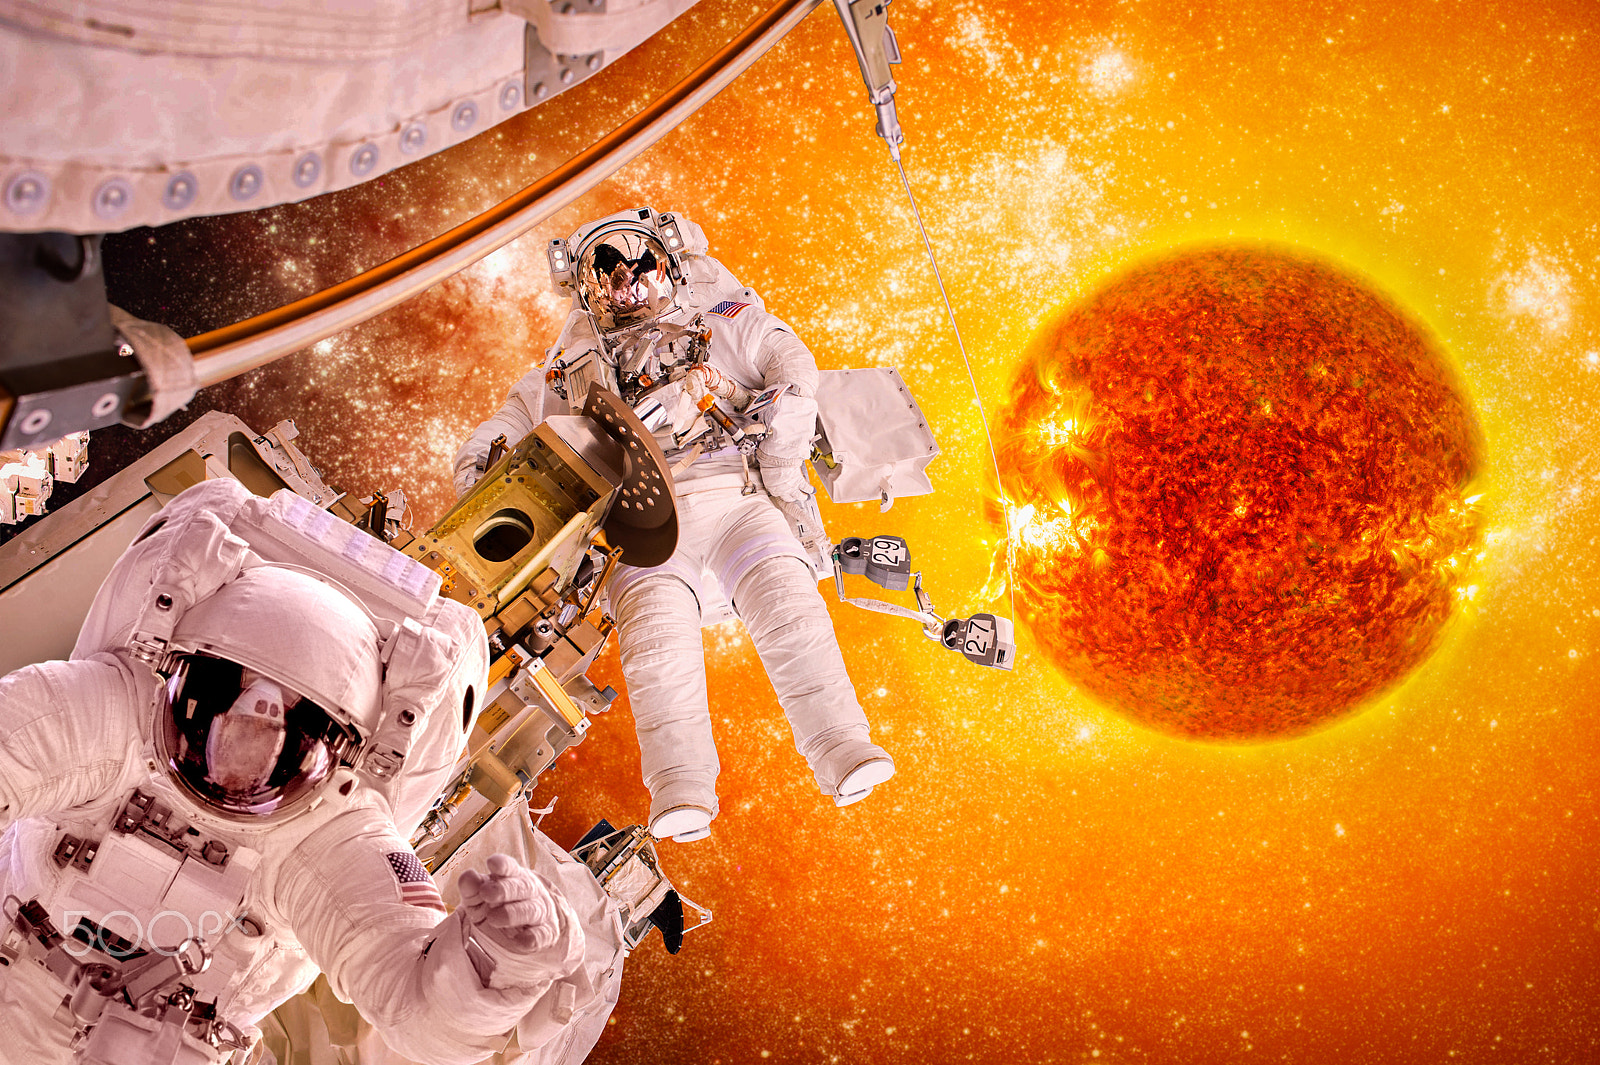 Nikon D4 sample photo. Spacecraft and astronauts in space on background sun star photography